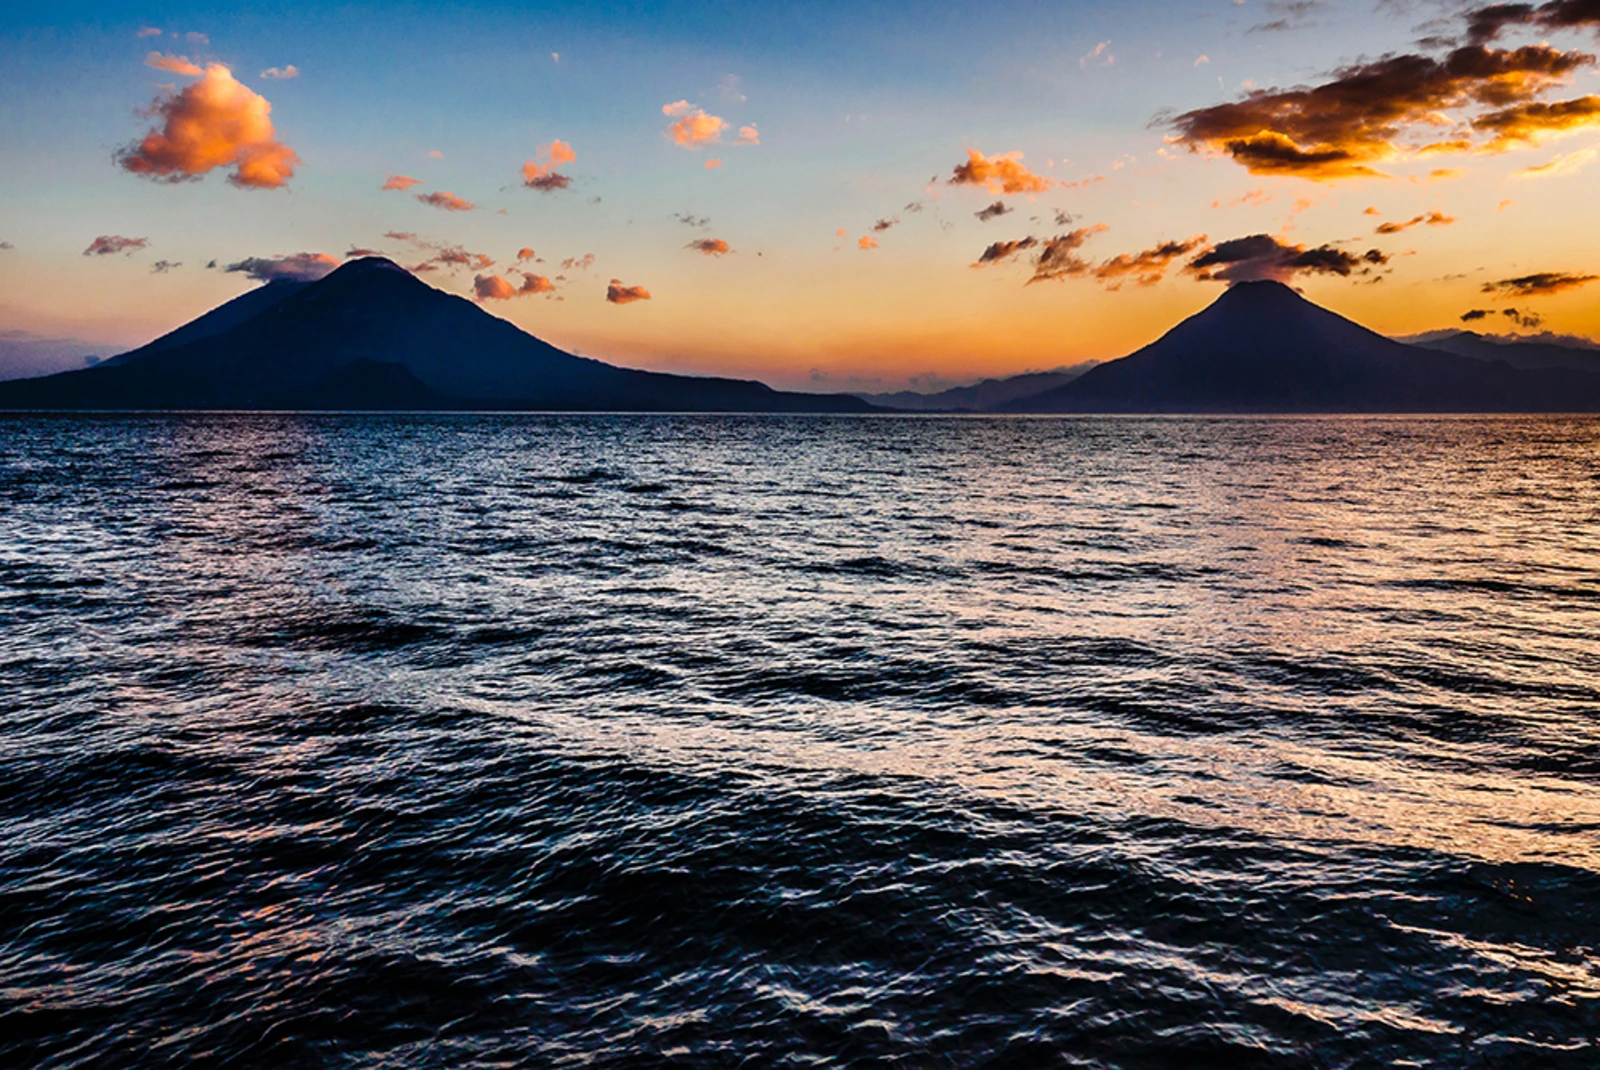 blue ocean at sunset in Guatemala with volcano mountains and pink clouds